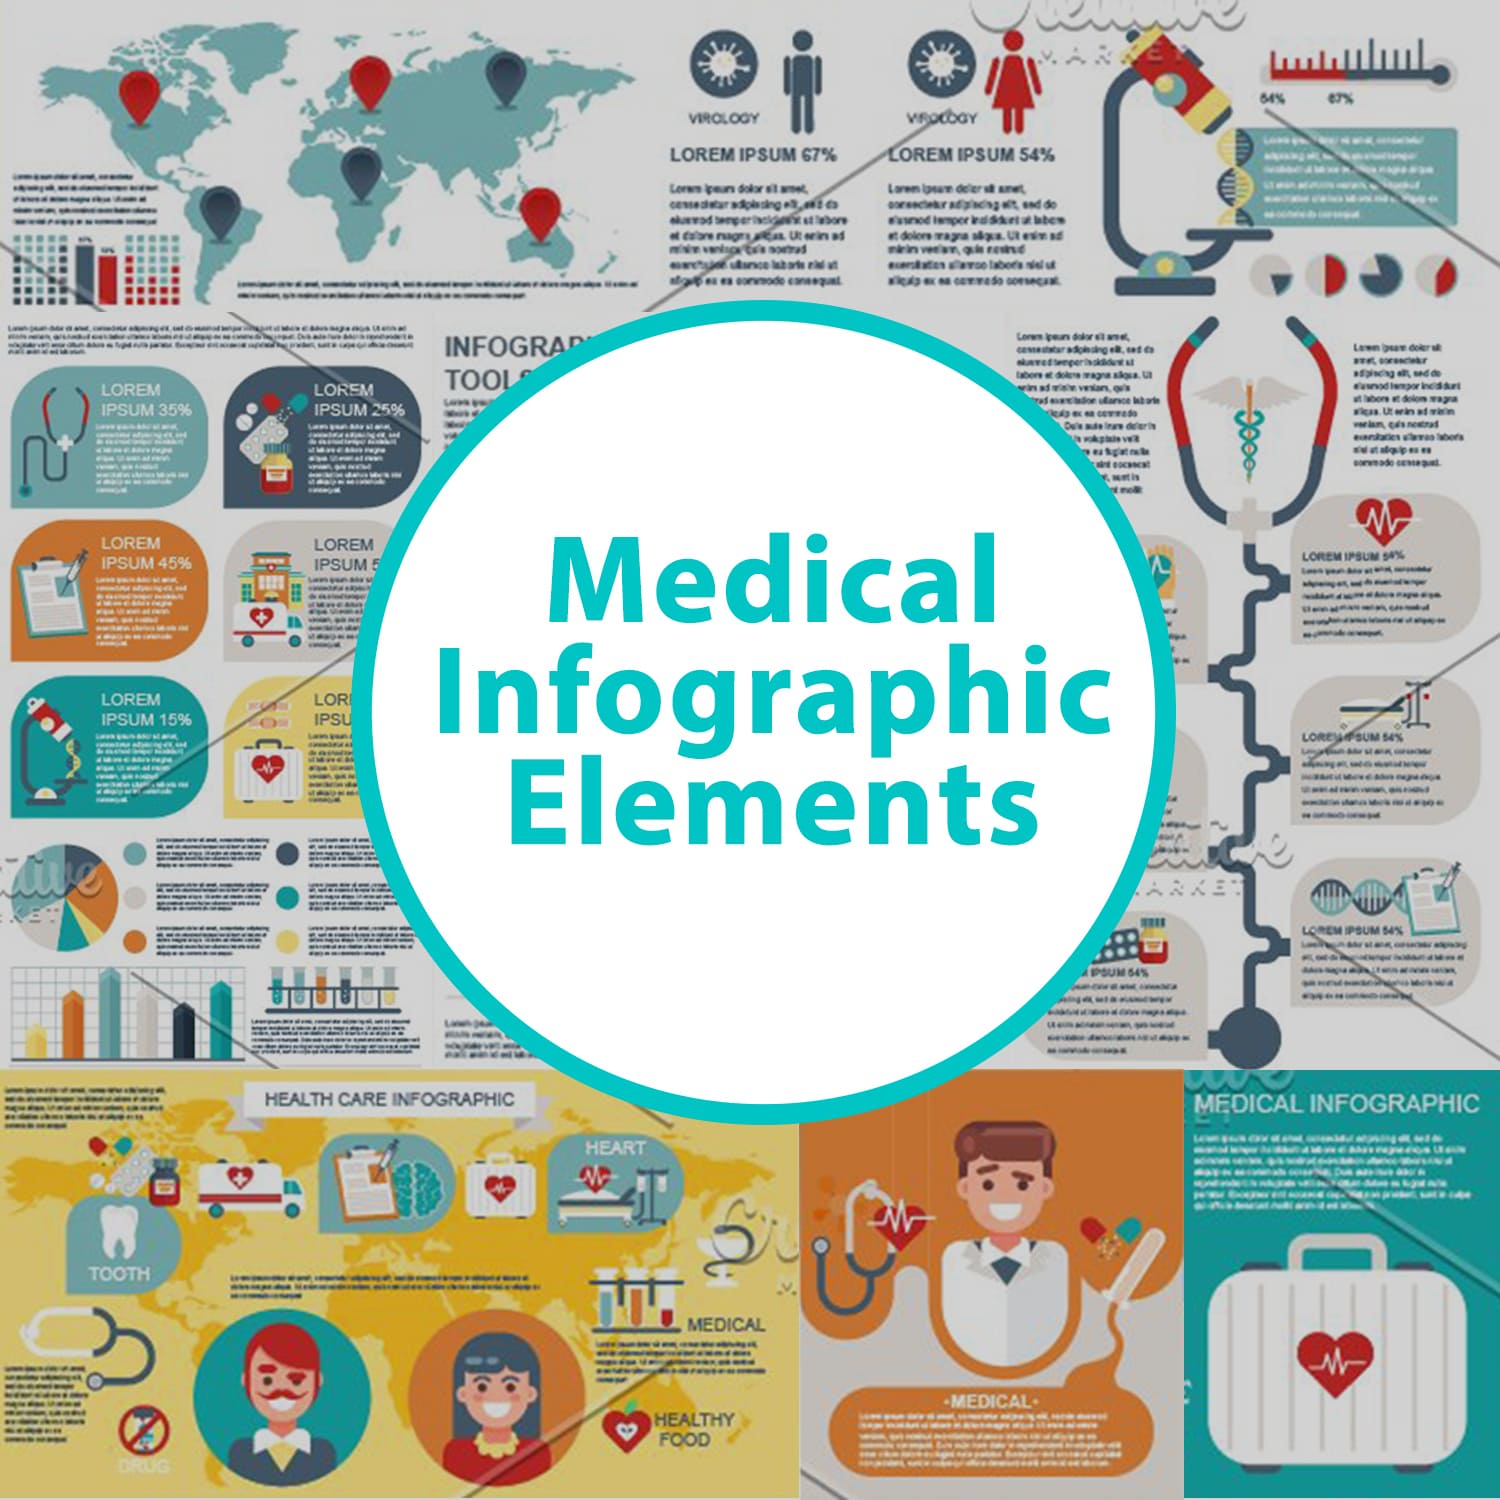 Medical Infographic Elements main cover.